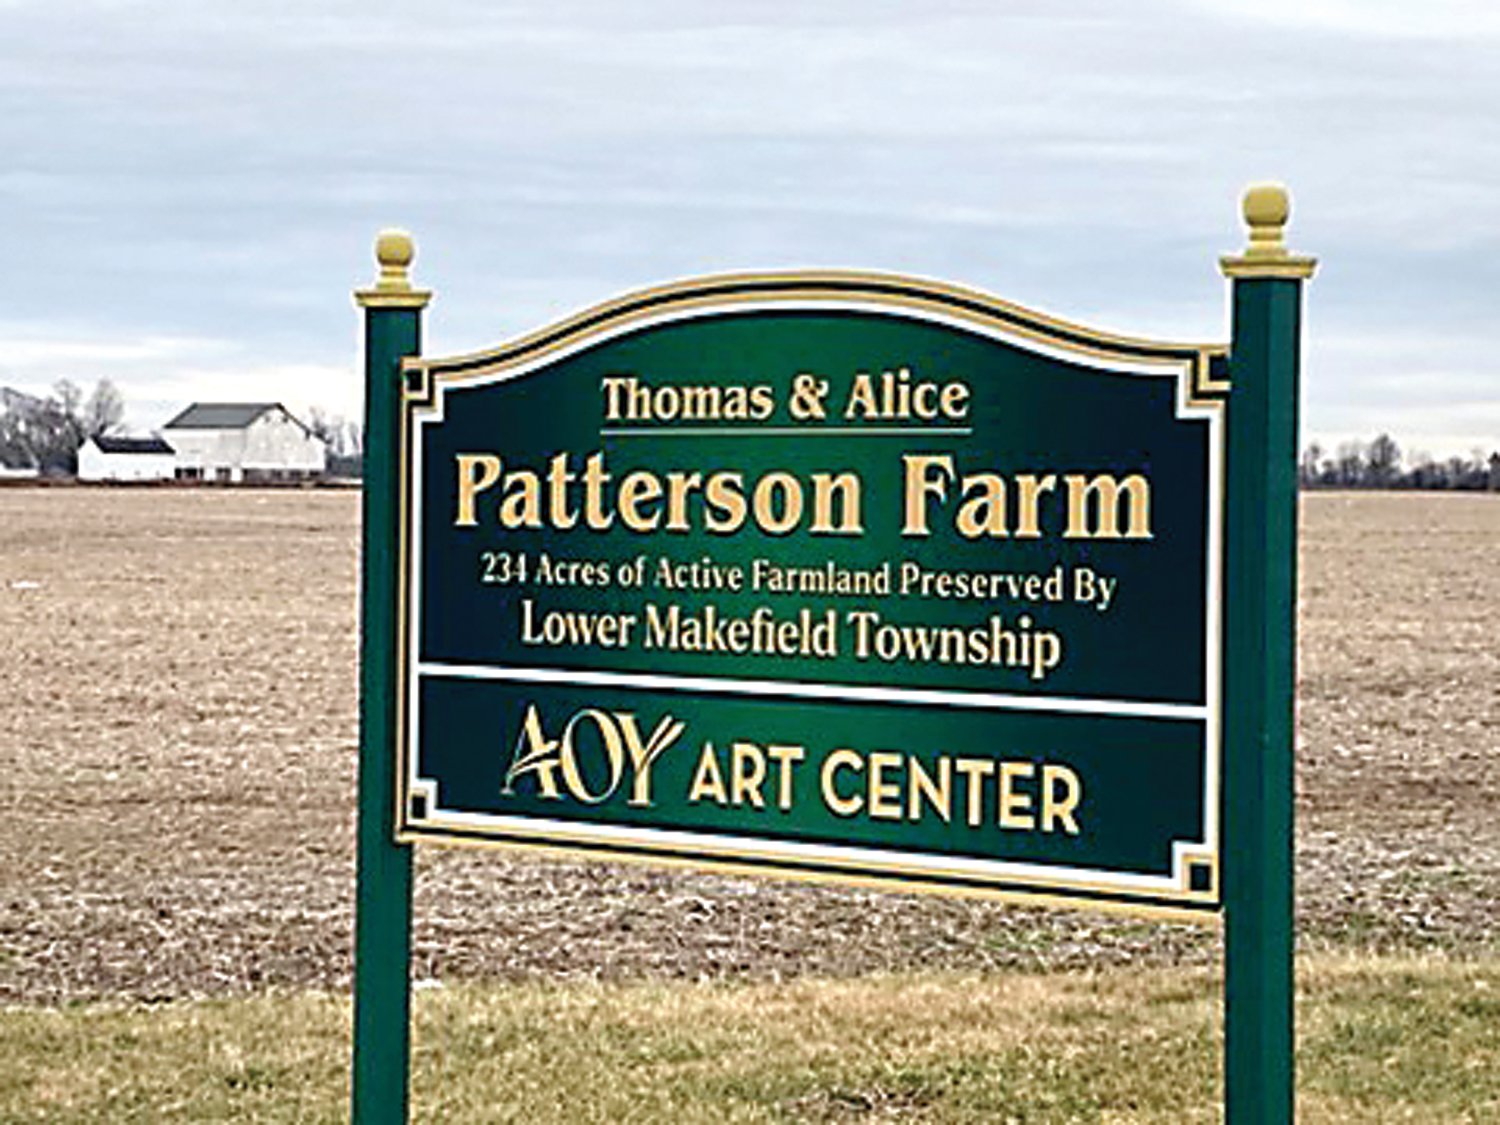 An architecture firm will develop over the next few months a master plan for the township-owned Patterson Farm in Lower Makefield.